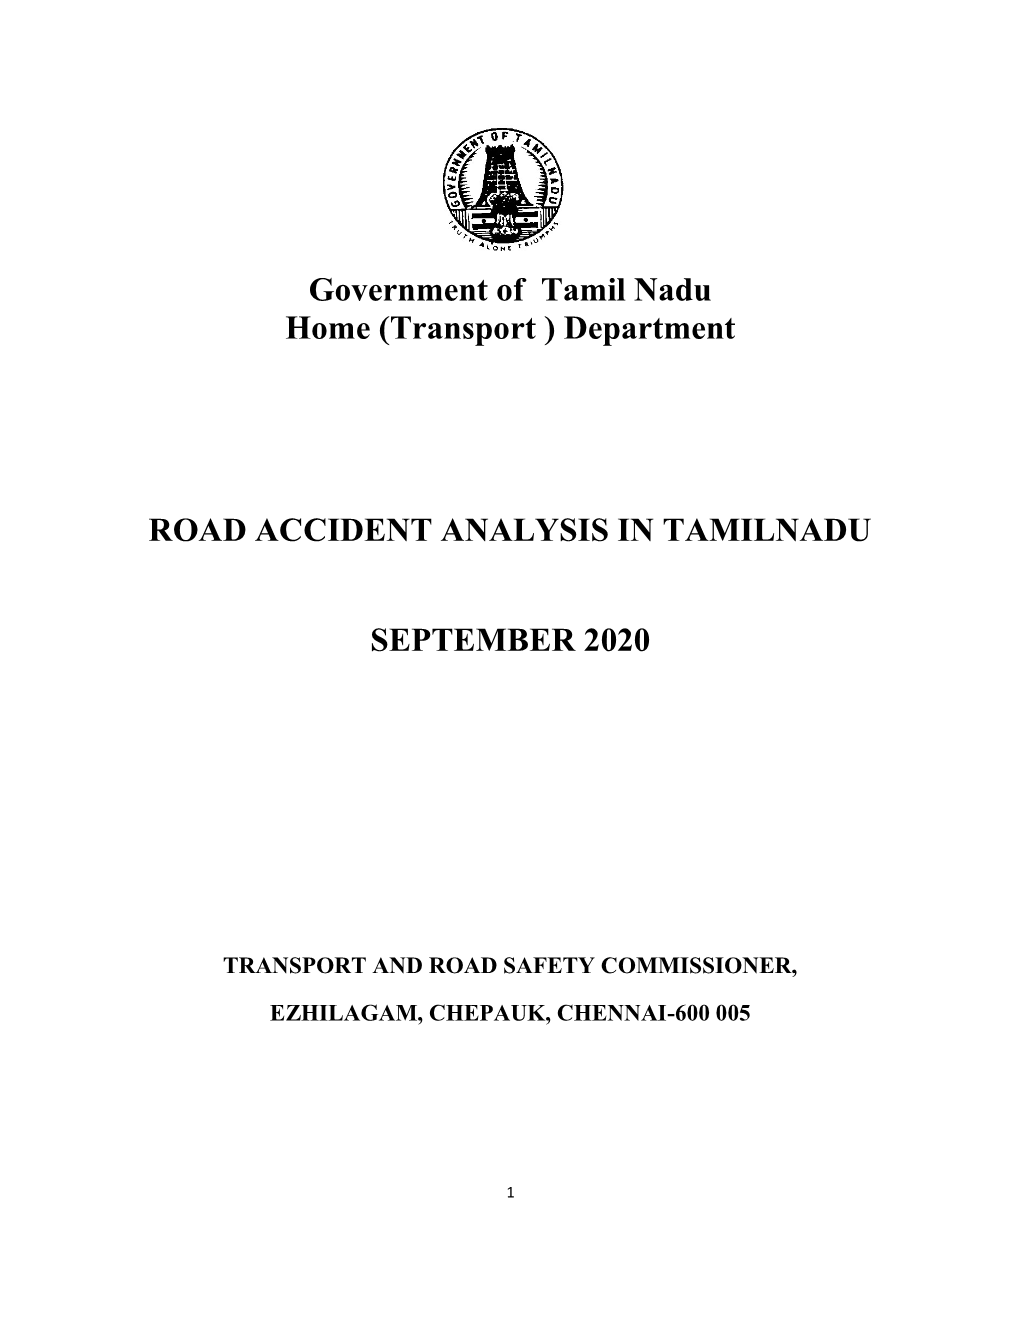 Government of Tamil Nadu Home (Transport ) Department ROAD ACCIDENT ANALYSIS in TAMILNADU SEPTEMBER 2020